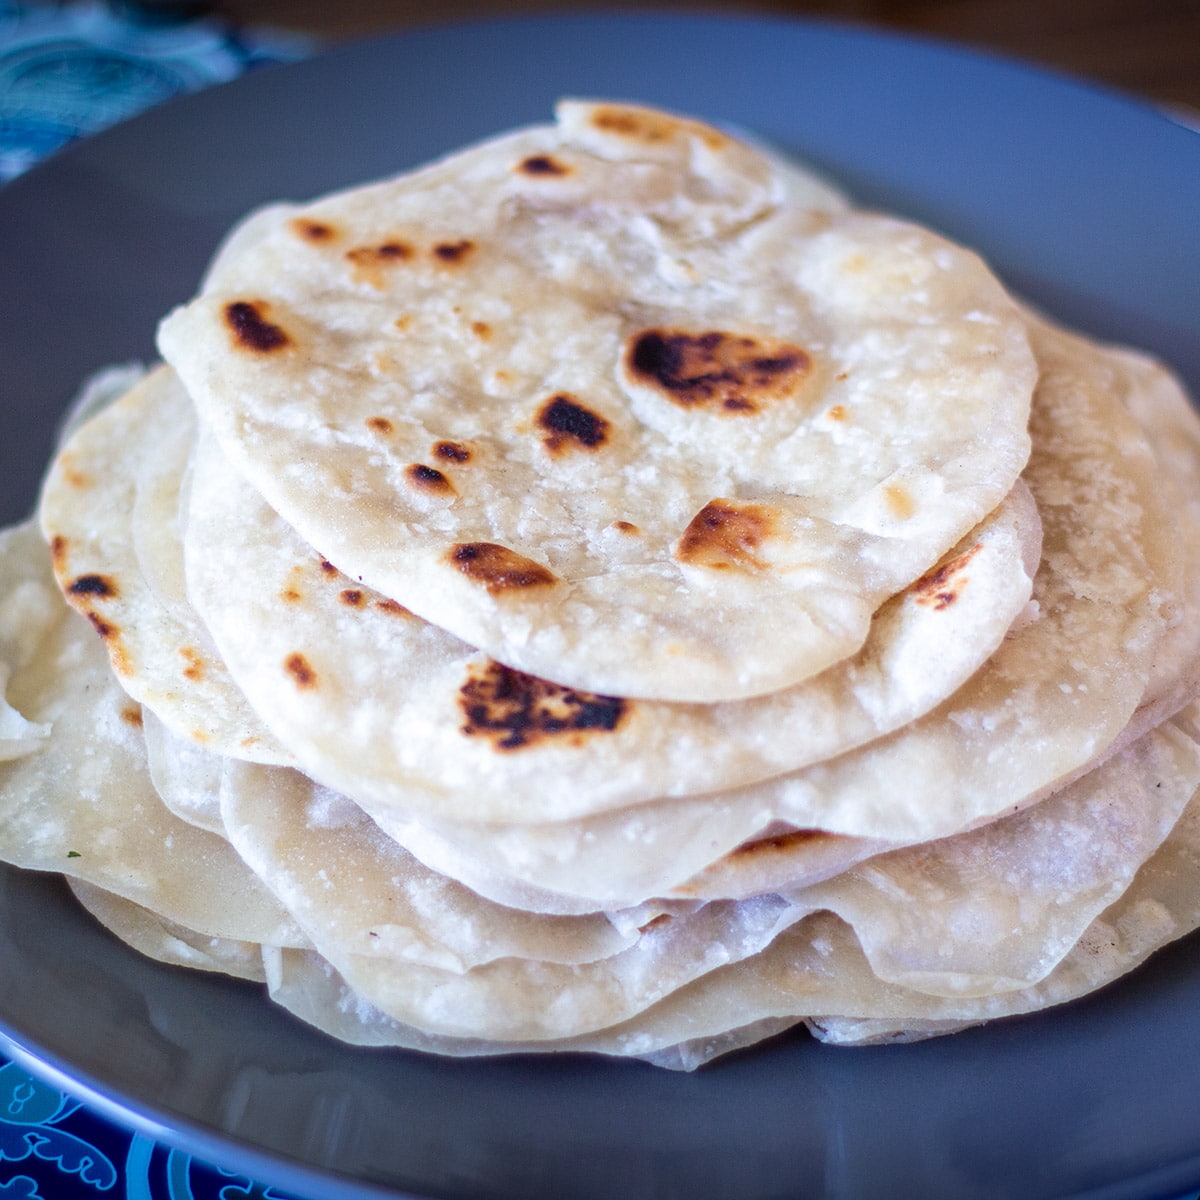 How To Make Authentic Homemade Flour Tortillas